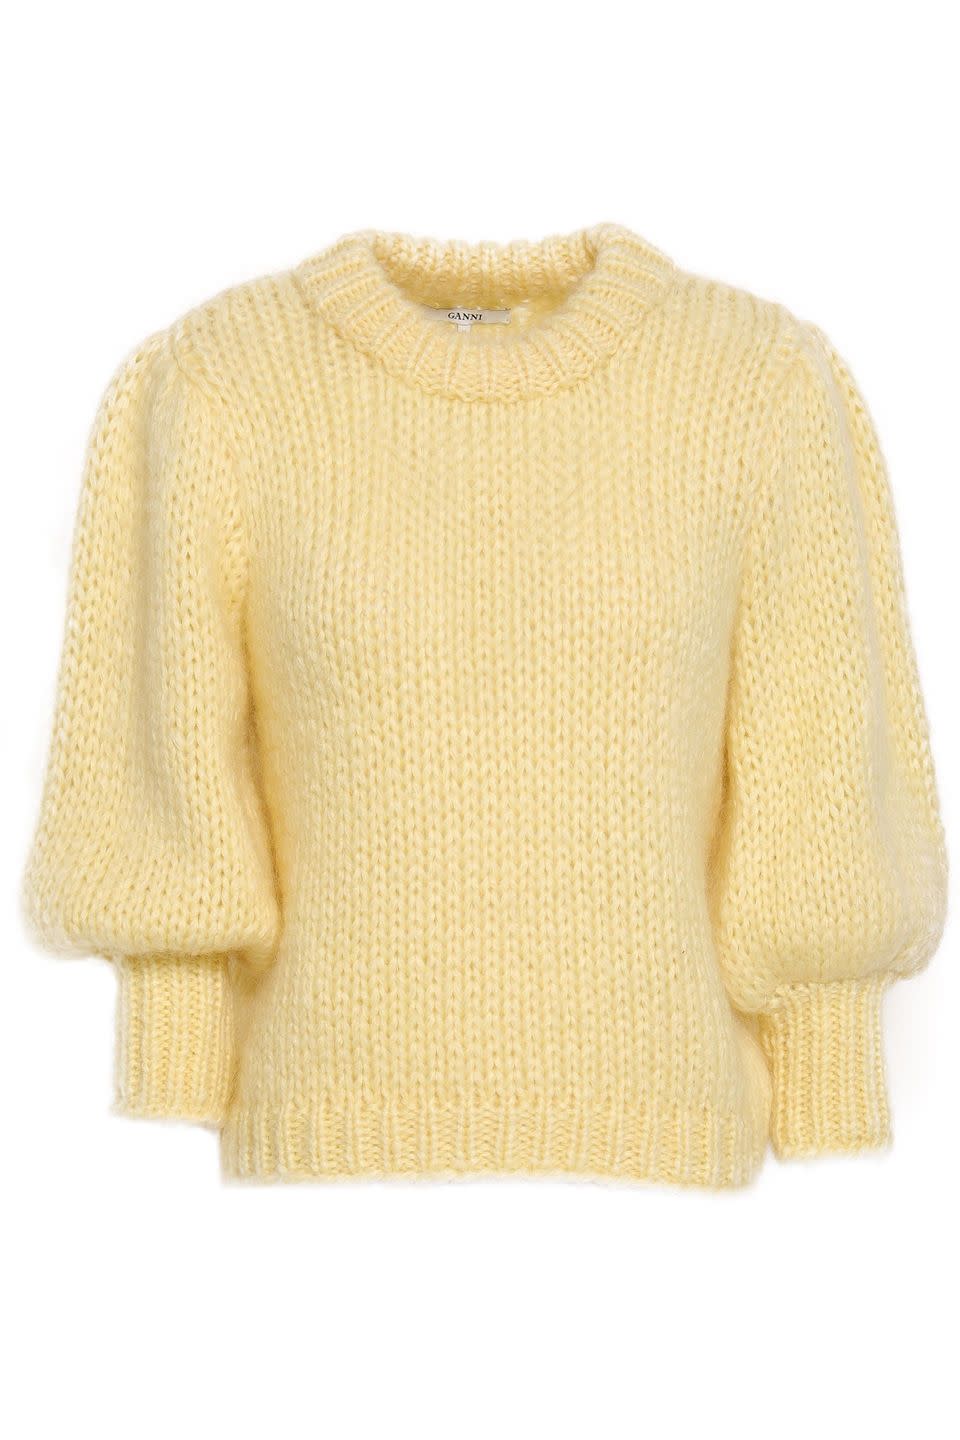 Shop it: The Puffy Sleeve Sweater